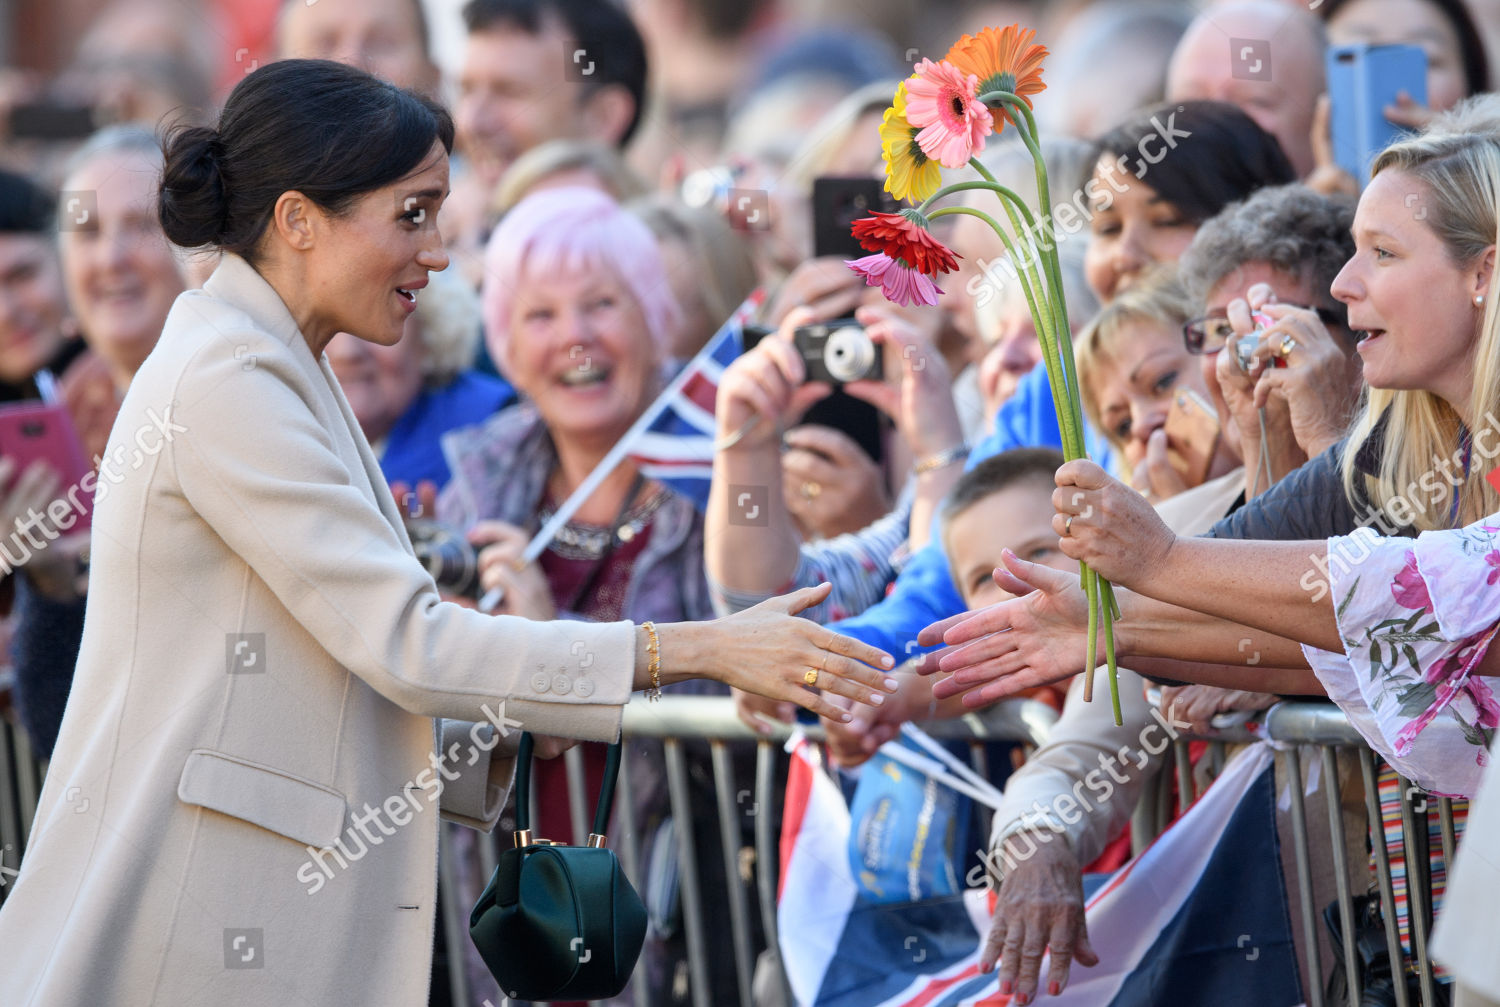 prince-harry-and-meghan-duchess-of-sussex-visit-to-sussex-uk-shutterstock-editorial-9912816by.jpg